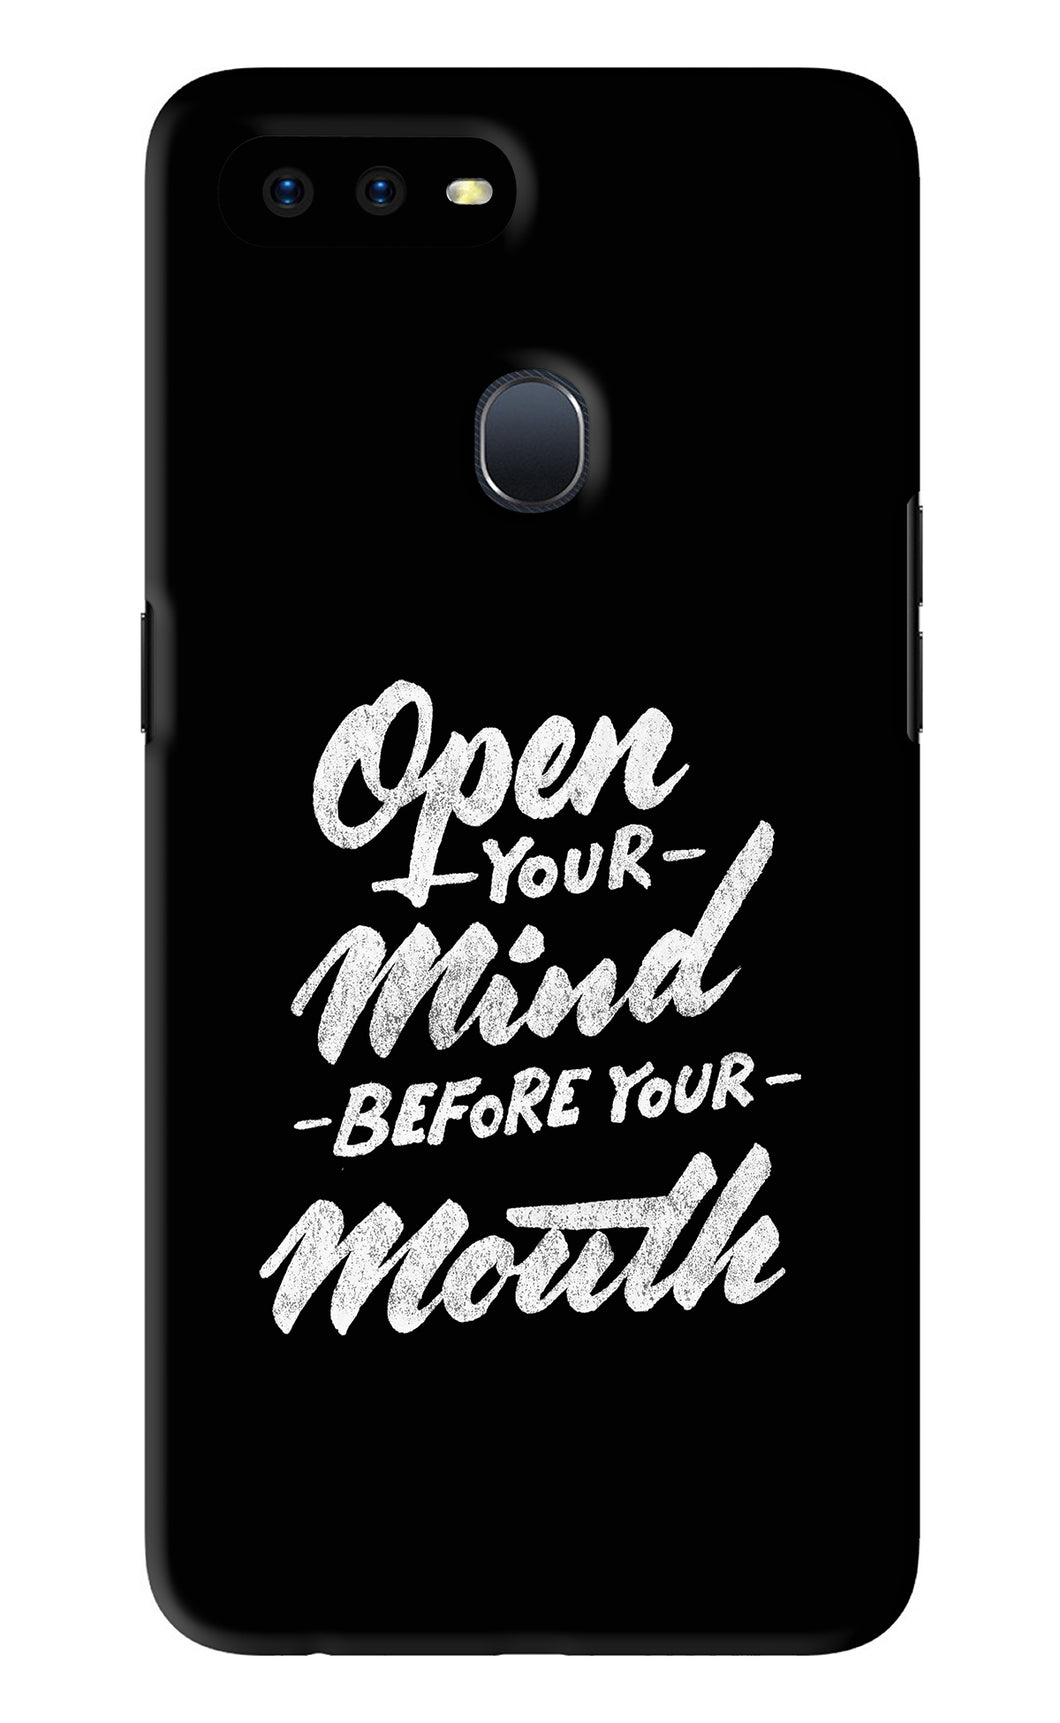 Open Your Mind Before Your Mouth Oppo F9 Pro Back Skin Wrap